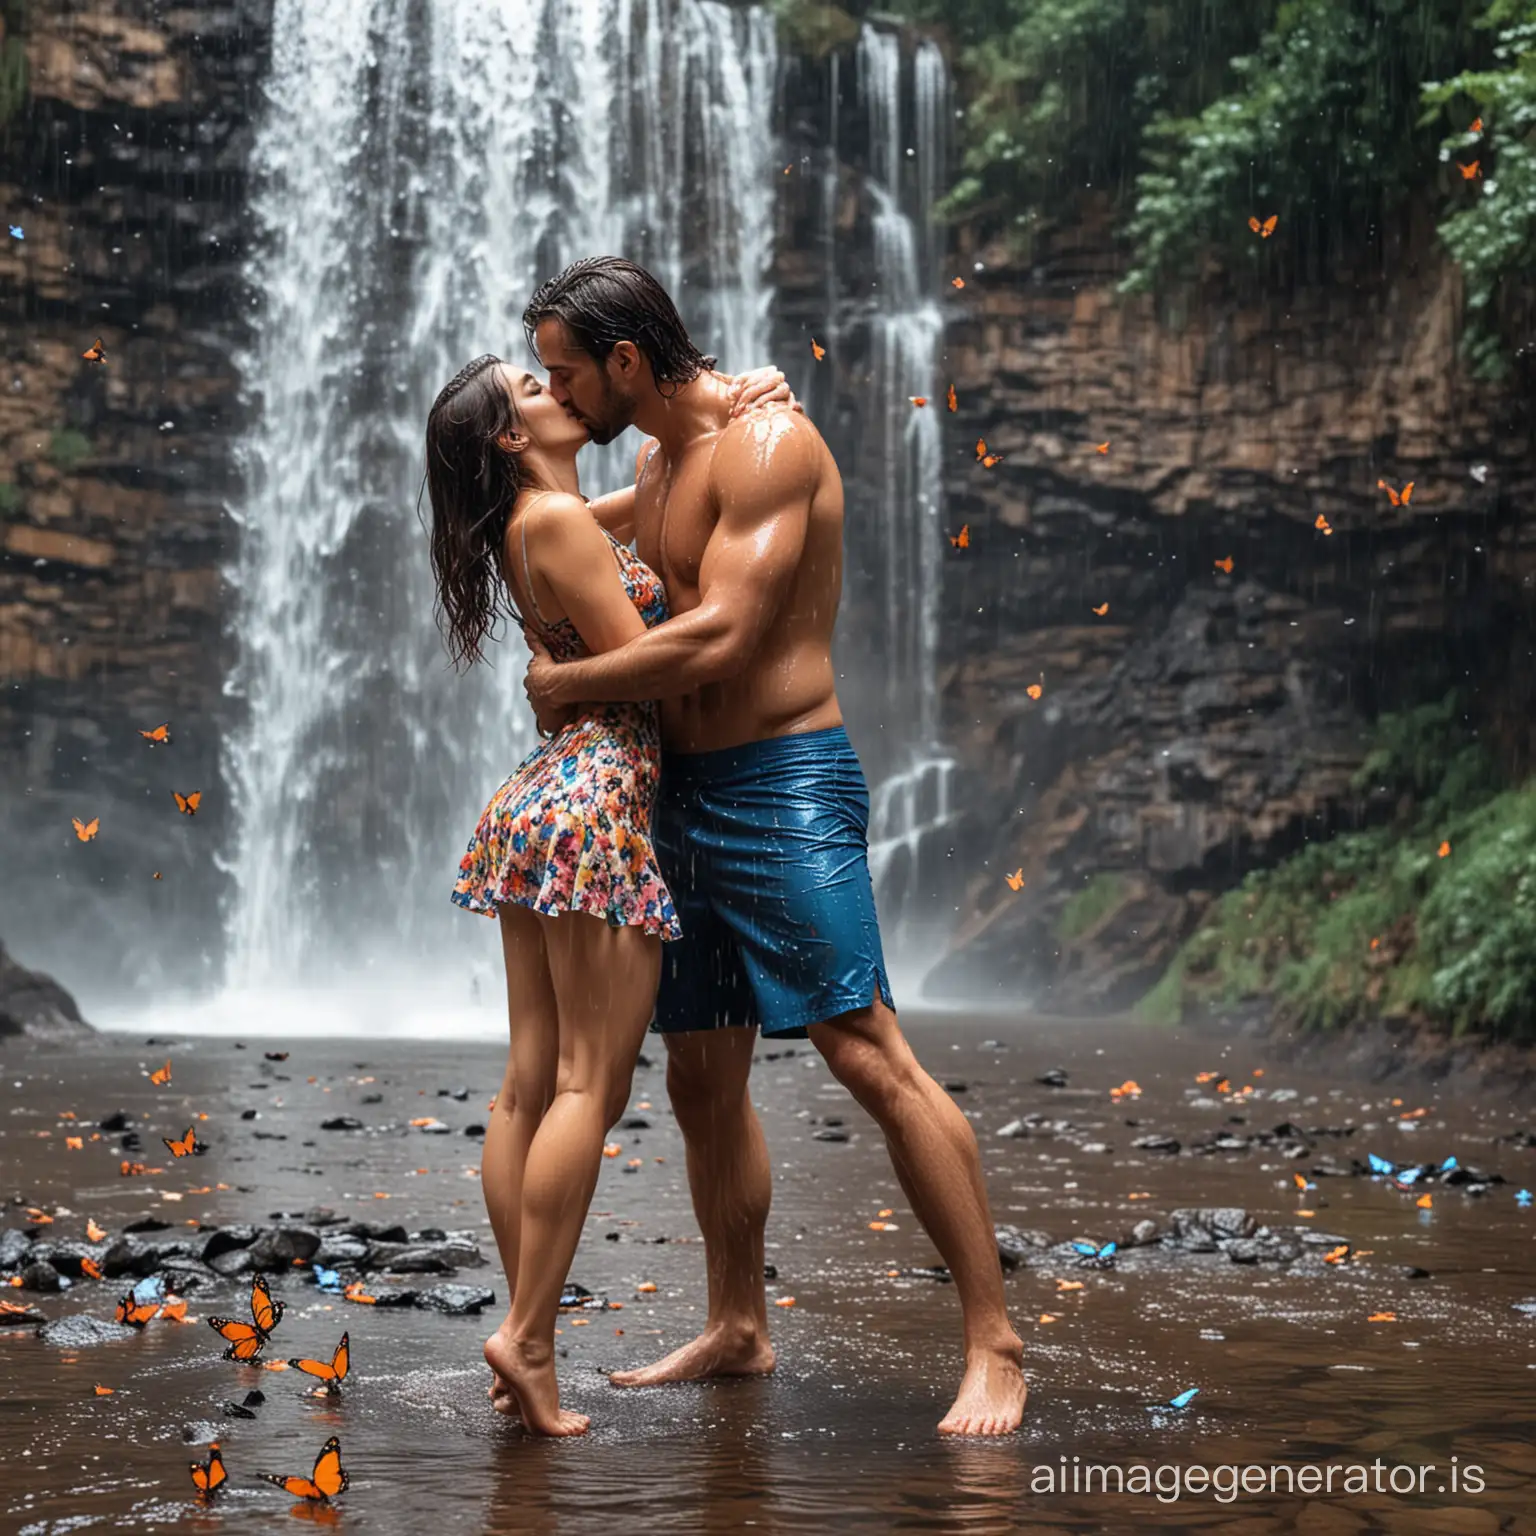 Passionate-Romantic-Kiss-in-Rain-Wet-Couple-Embracing-Near-Waterfall-with-Butterflies